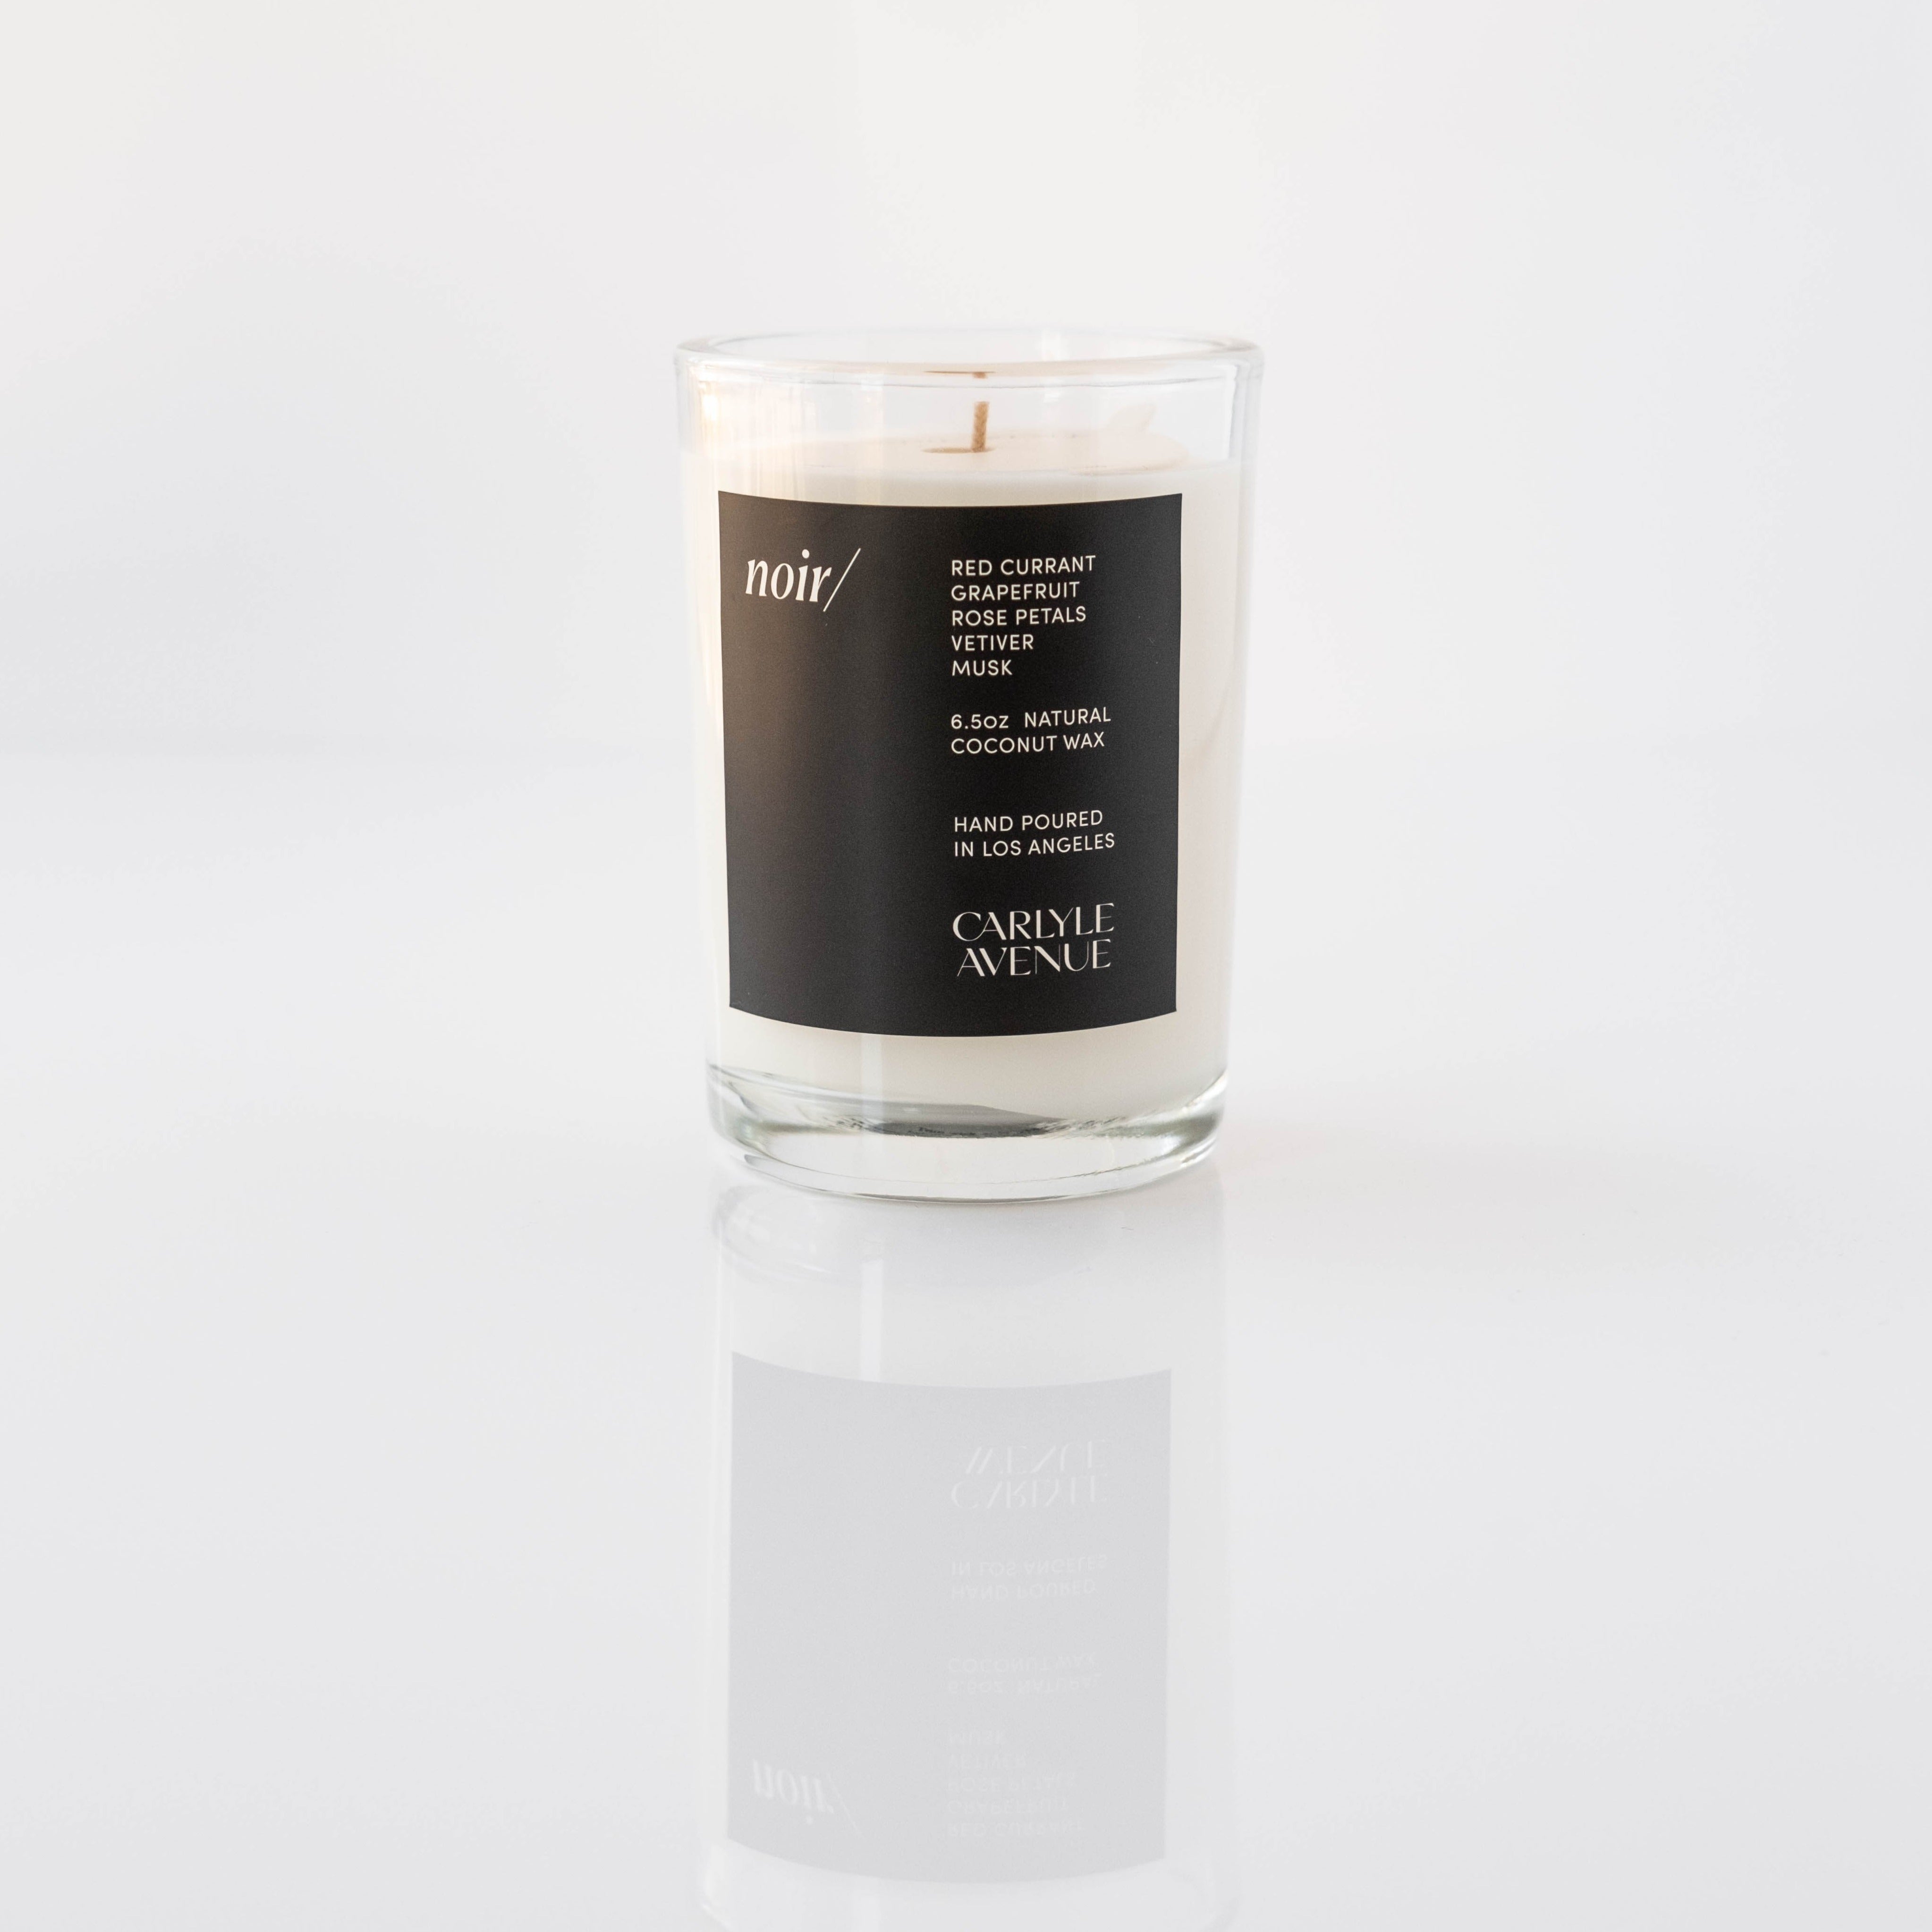 Carlyle Avenue Scented Candle - Noir